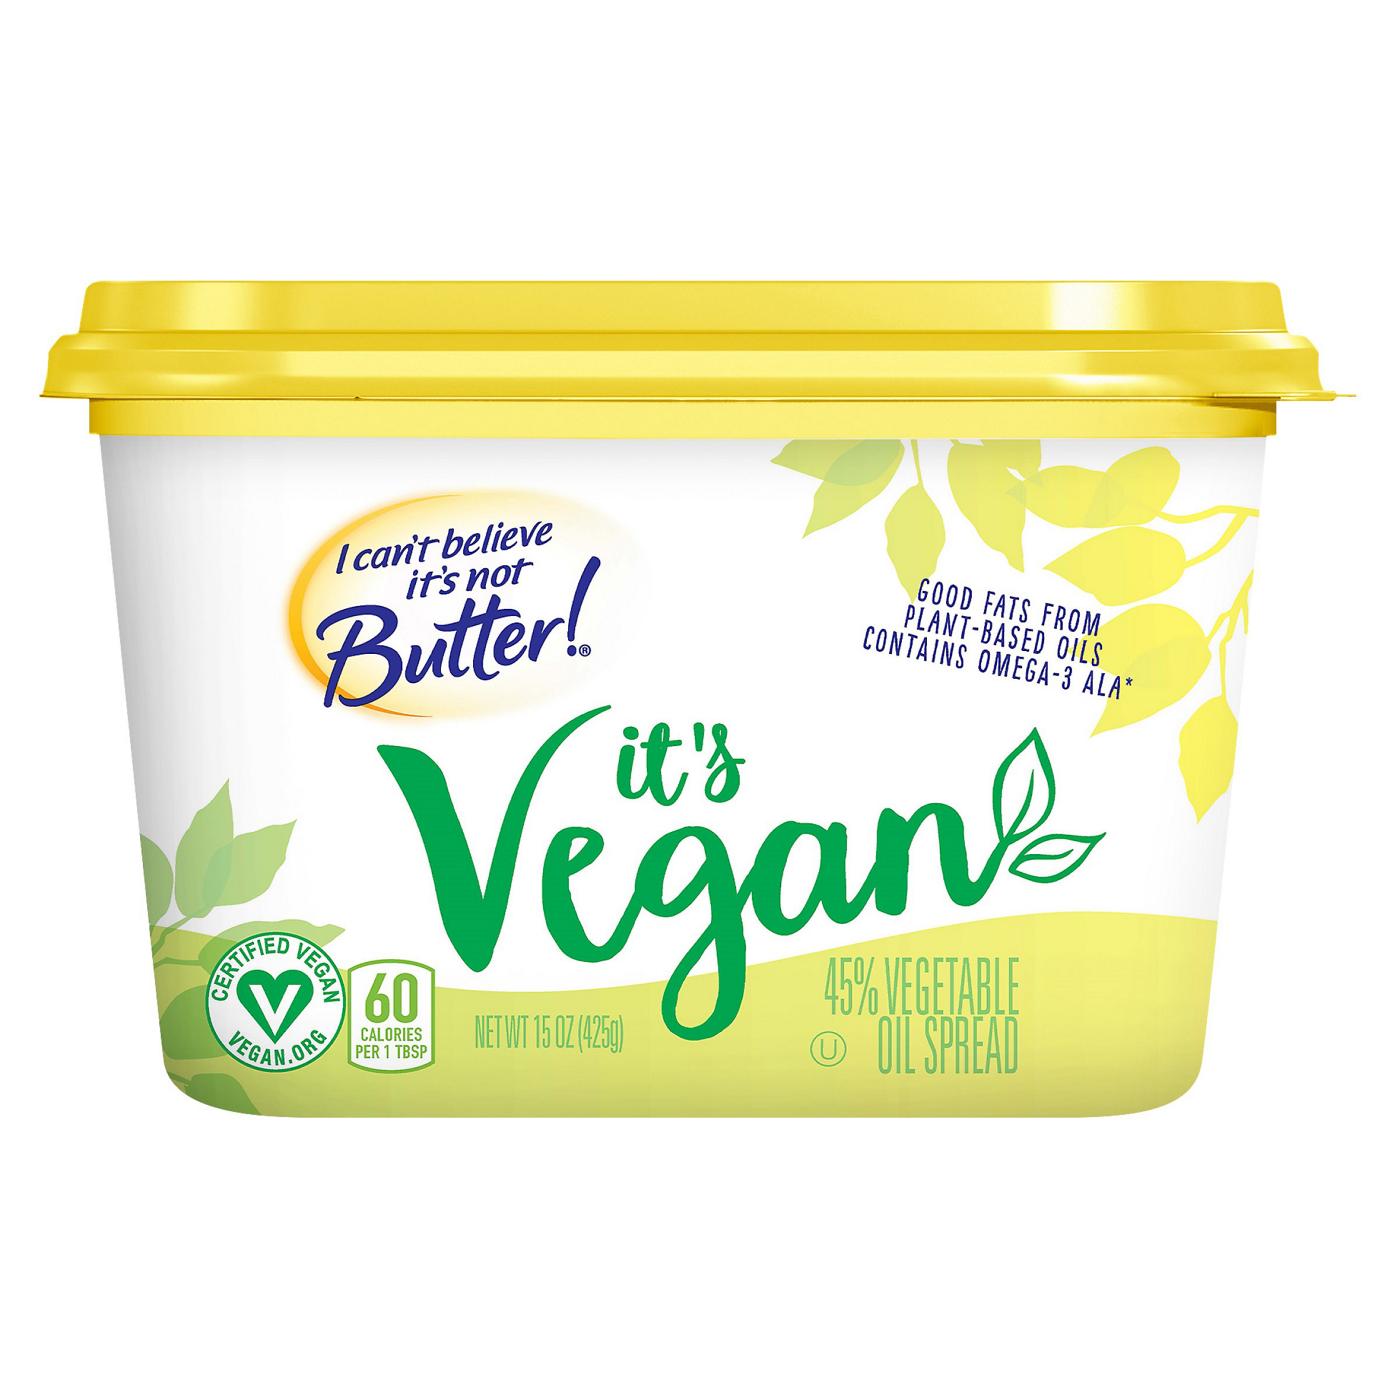 I Can't Believe It's Not Butter! Vegan Spread; image 1 of 9